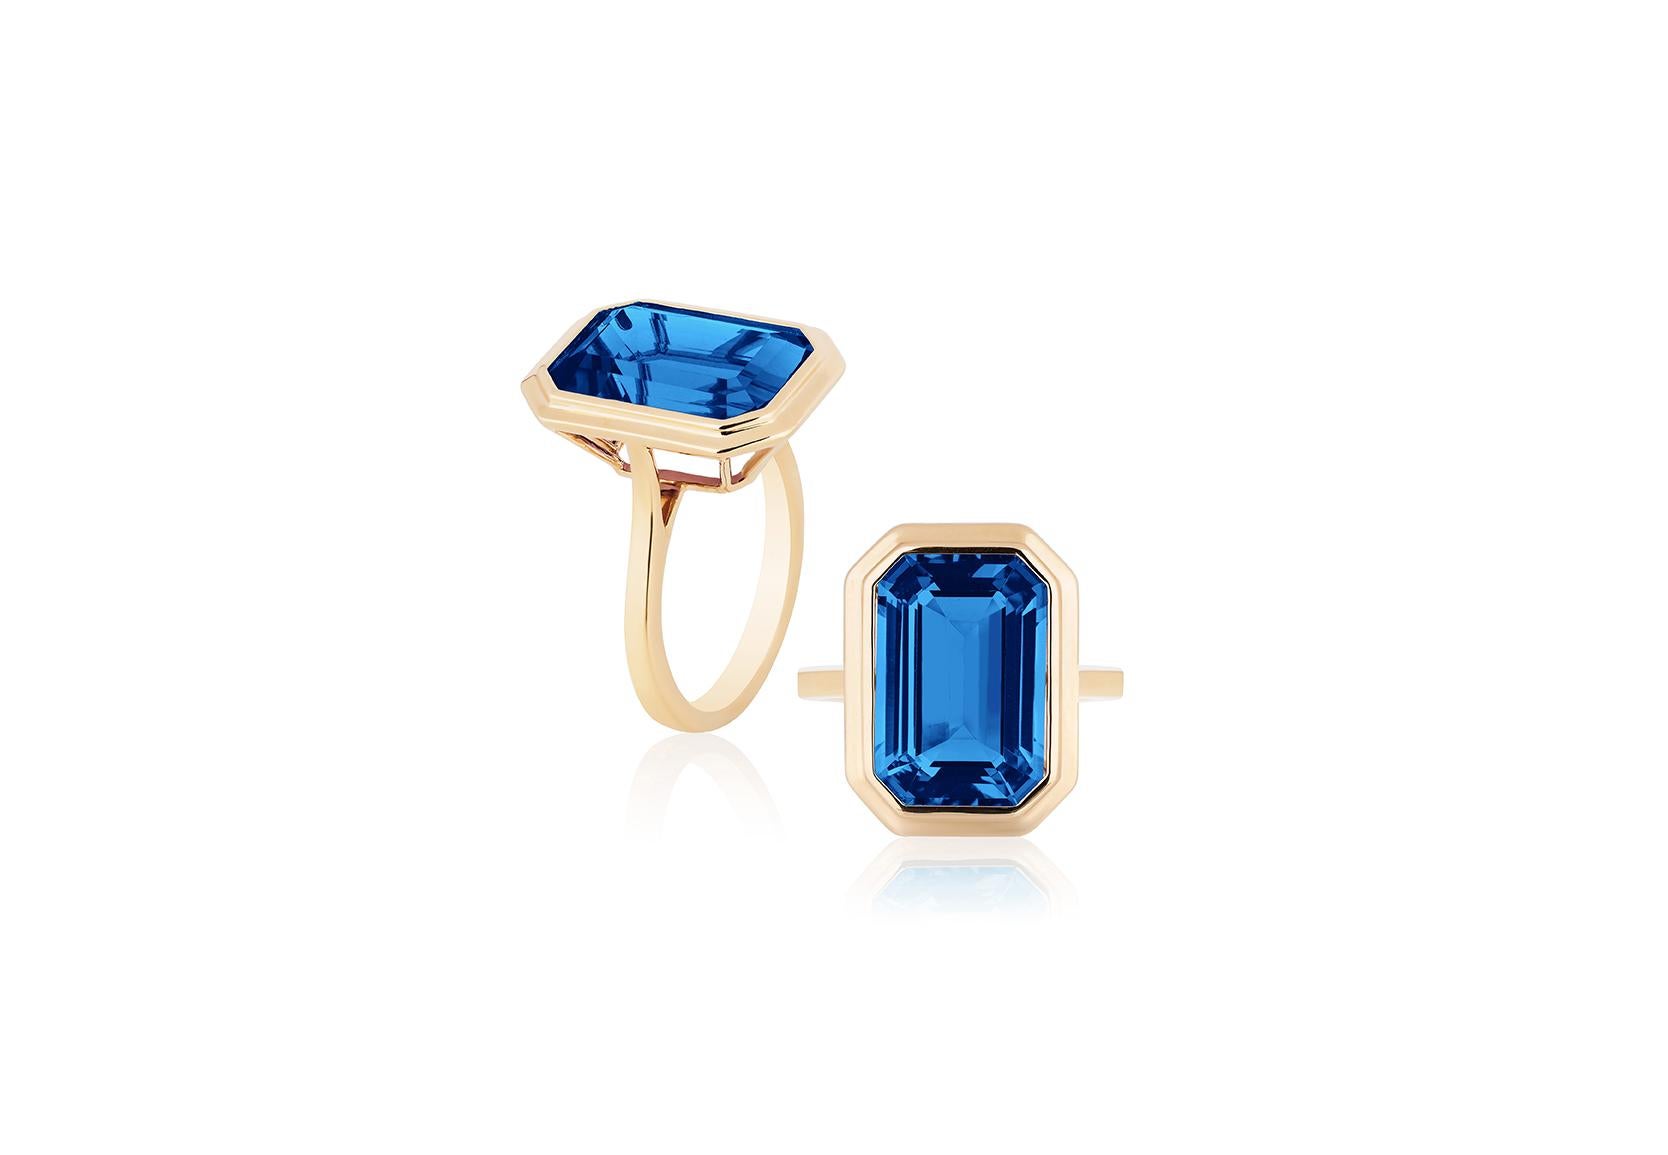 A classic yet an everyday bold statement piece, this amazing cocktail ring is part of our very new ‘Manhattan’ Collection. It has a 10 x 15 mm emerald cut London Blue Topaz in a bezel setting in 18k gold.   ​

Minimalist lines yet bold structures is